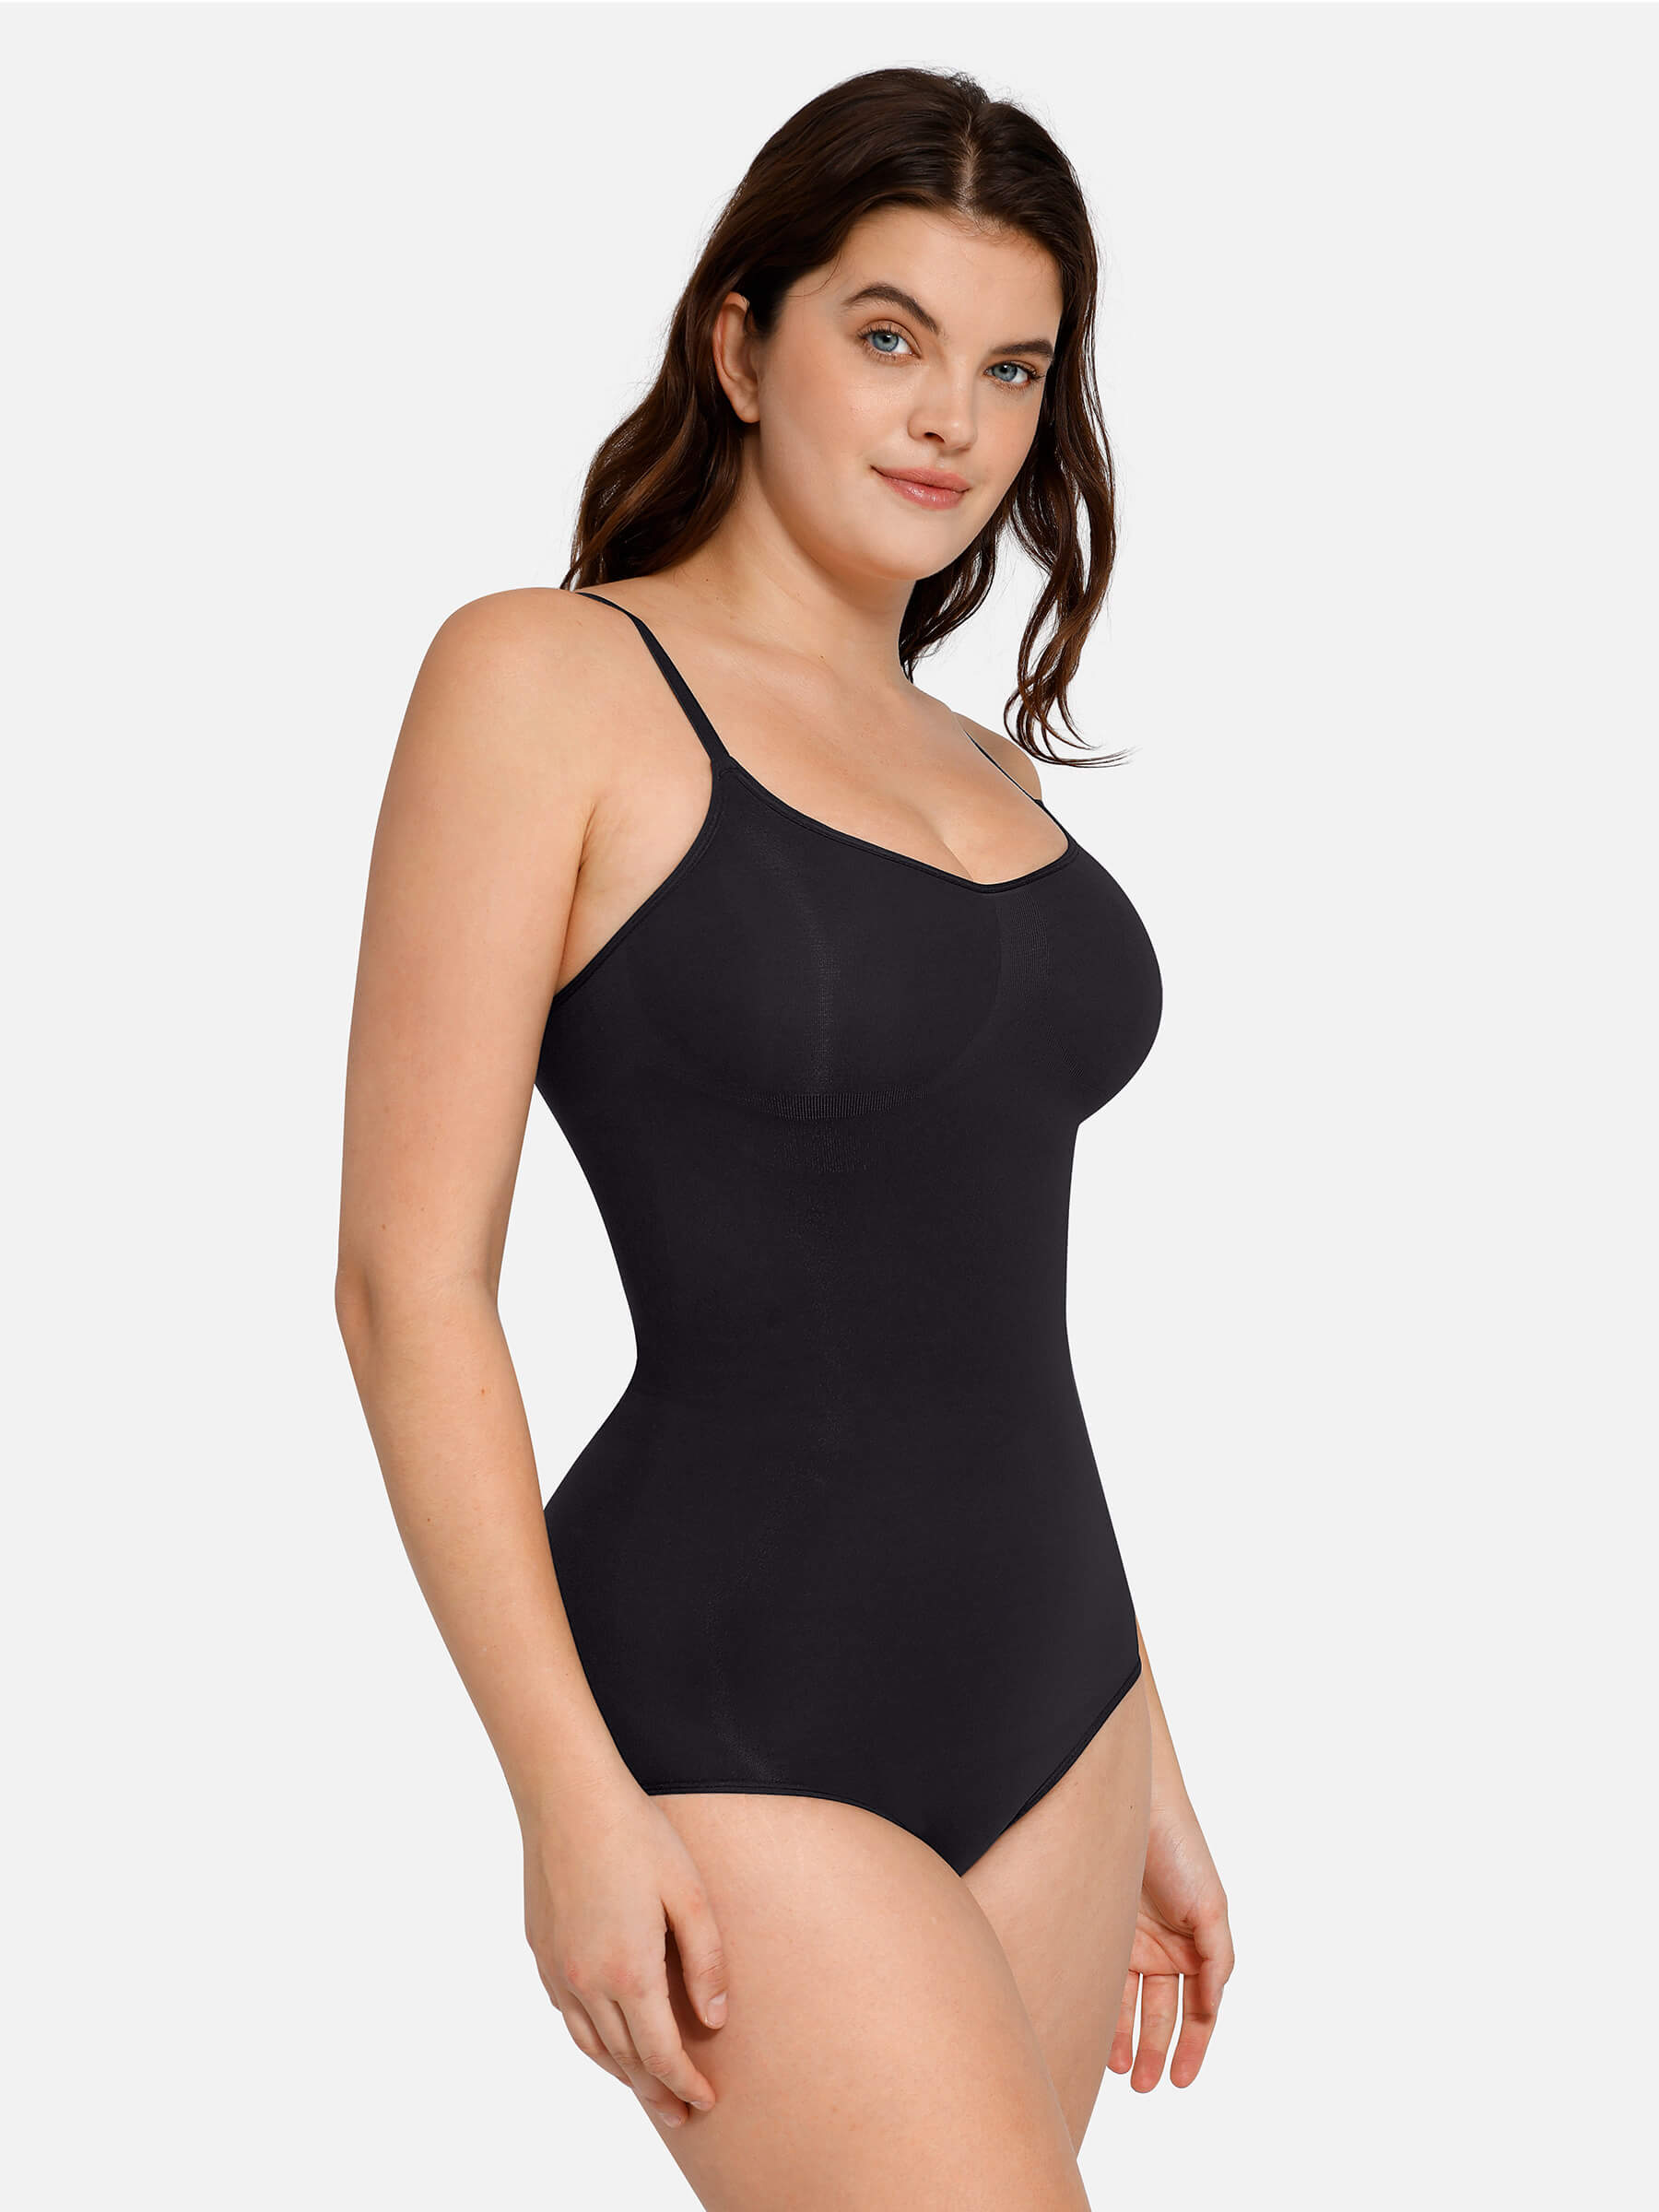 Sculpting Seamless Smoothing BodysuitFeelingirl Sculpting Seamless Smoothing Bodysuit